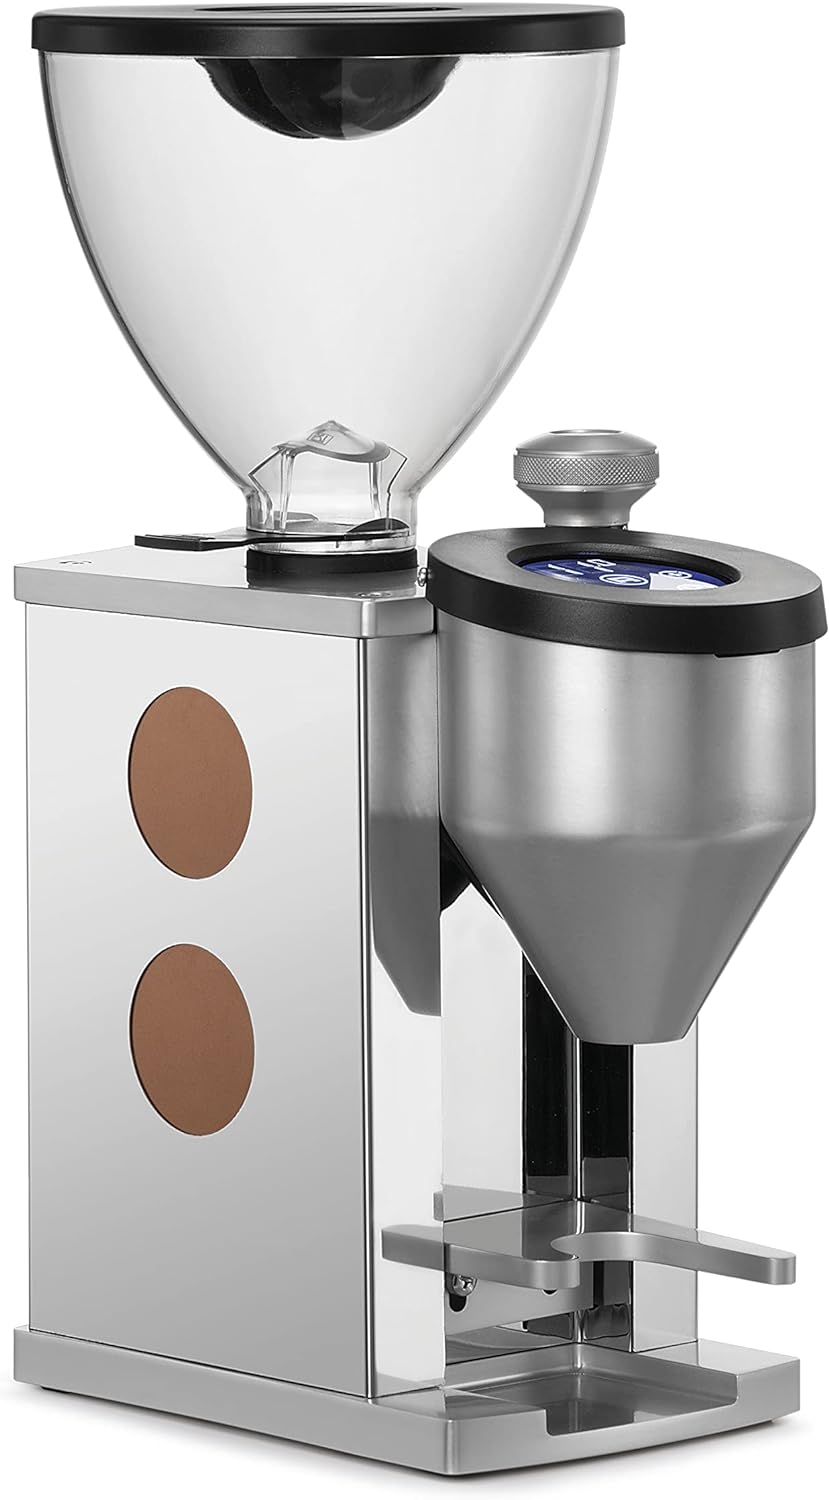 Rocket Faustino Coffee Grinder Chrome/Copper Compact Coffee Grinder With Elegant But Simple Design and High Quality